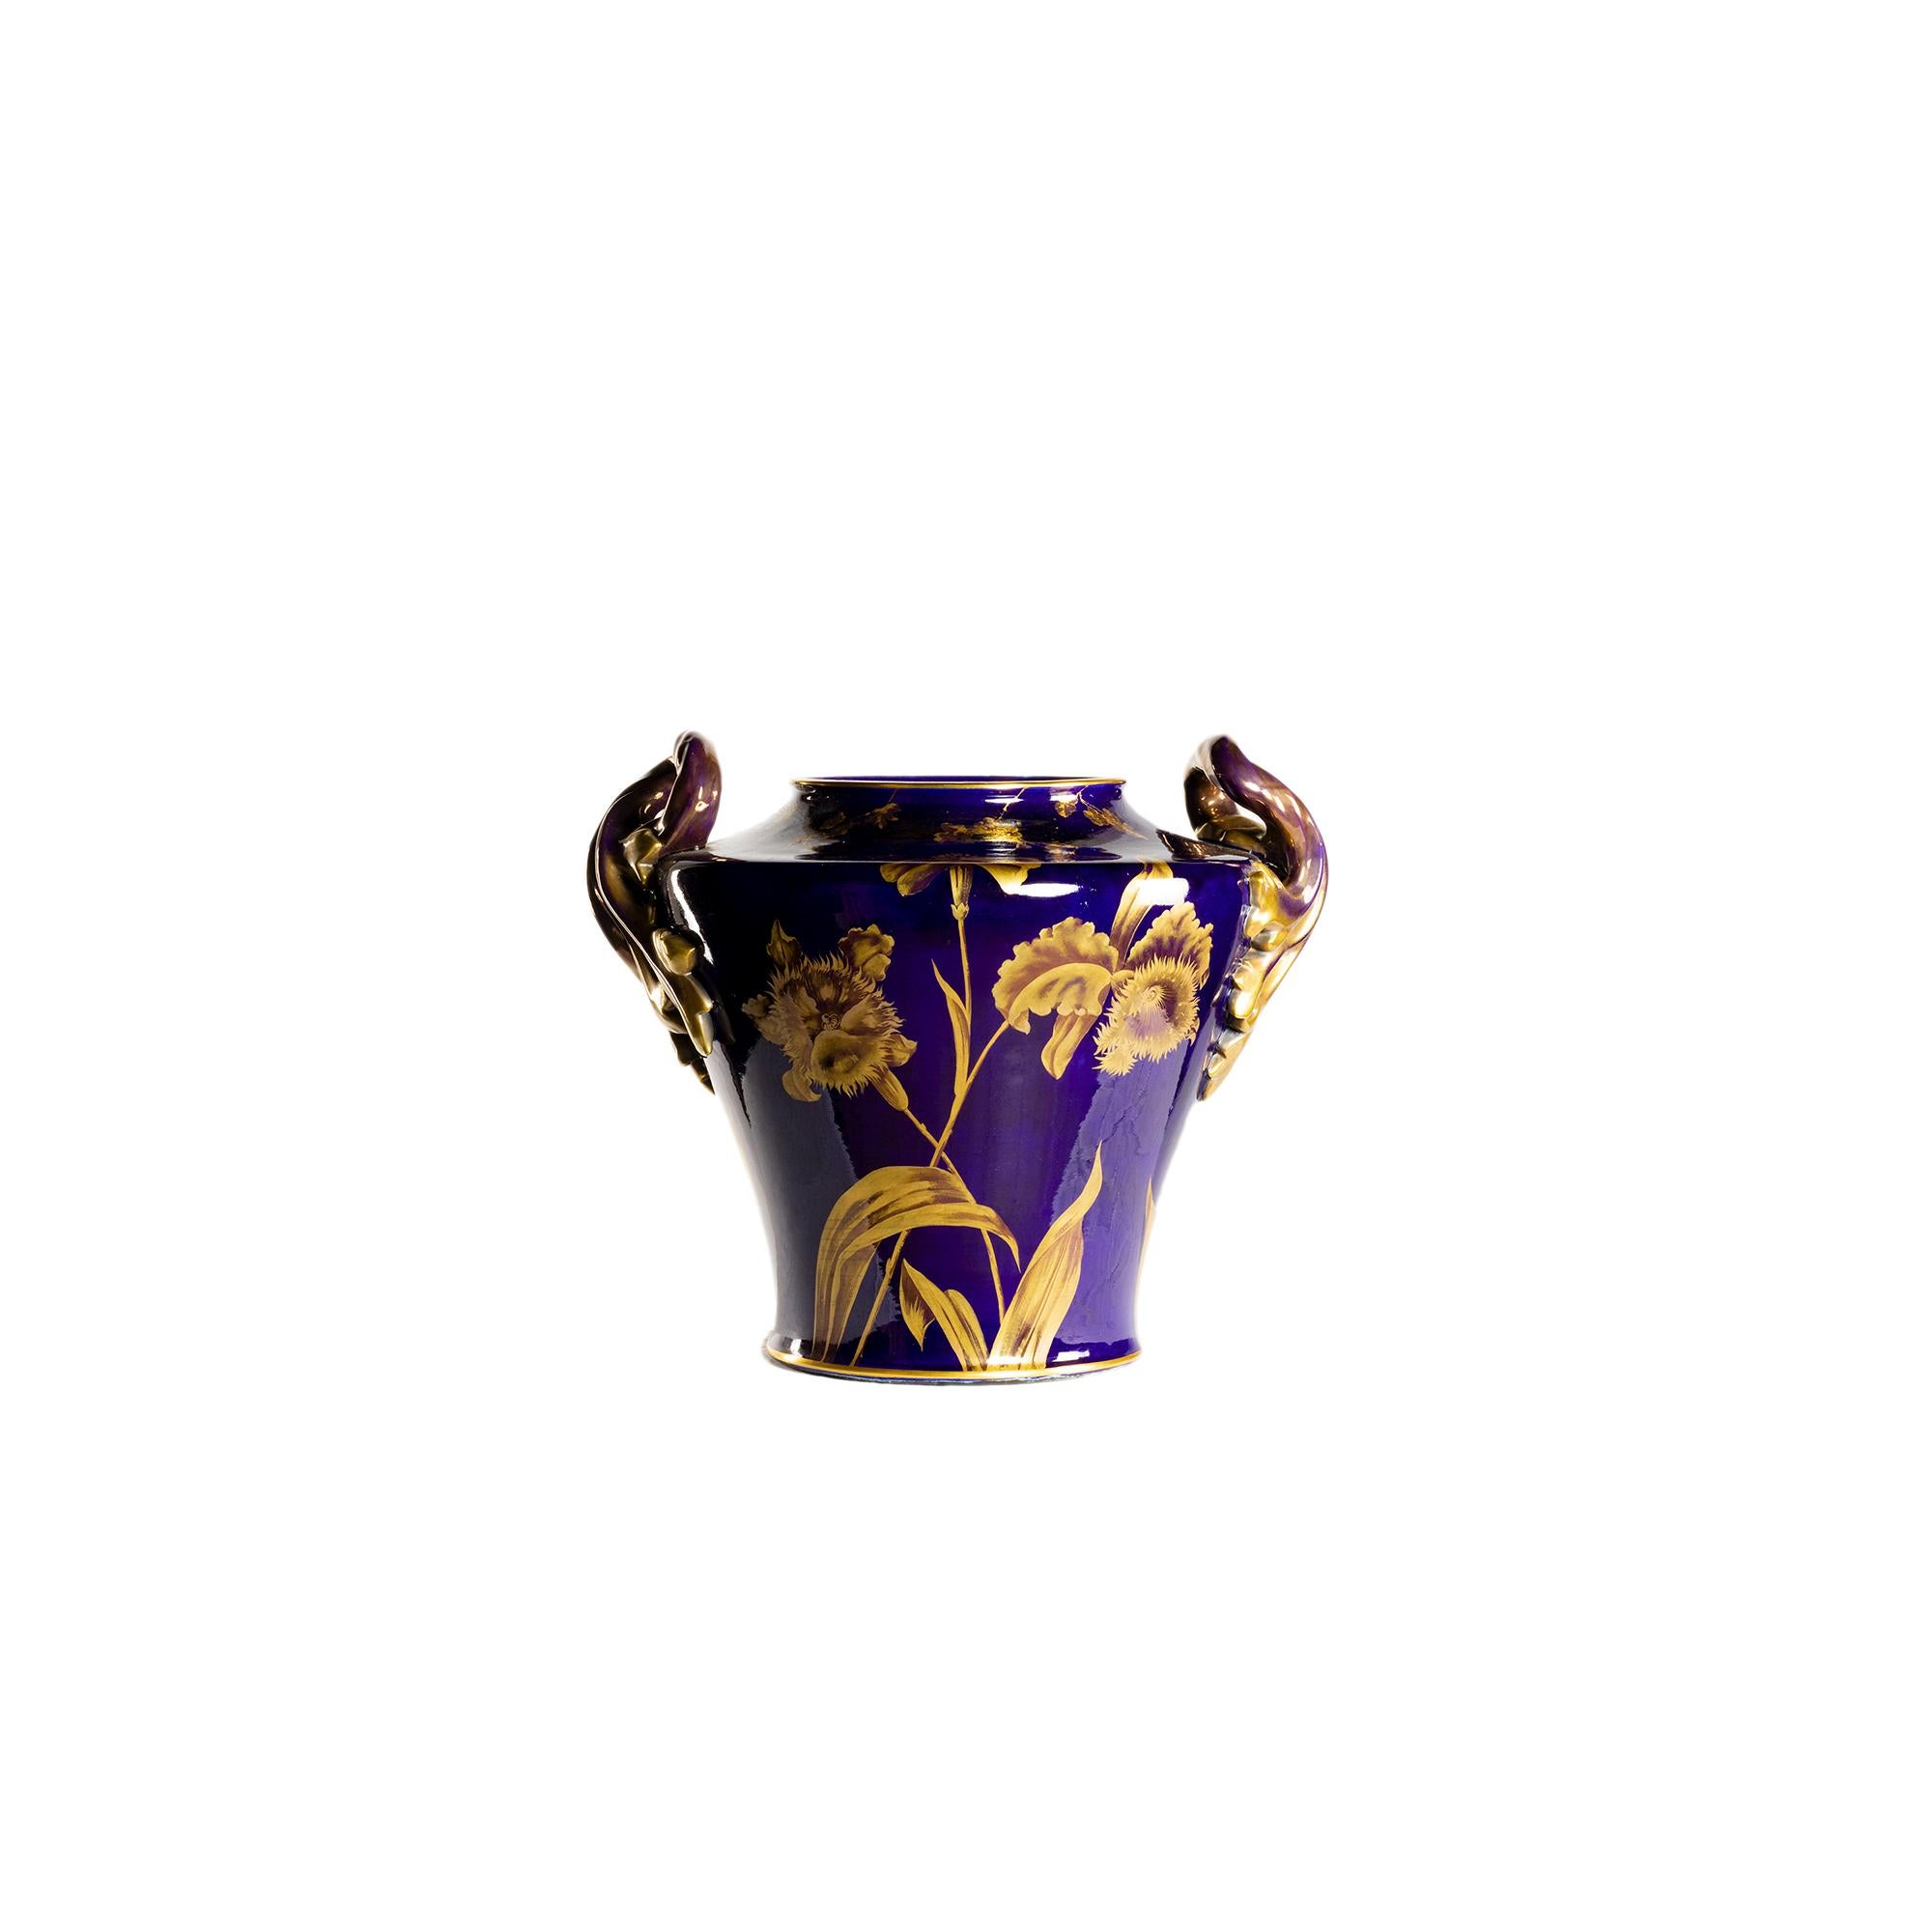 A beautiful two-handled large ceramic vase depicting Virginia creeper in flower made of gilding on a blue of Tours background.
A model by Gustave Asch, renowned ceramic sculptor who worked in Sainte Radegonde (Rodez, Aveyron).  
Ax (Sainte-Radegonde